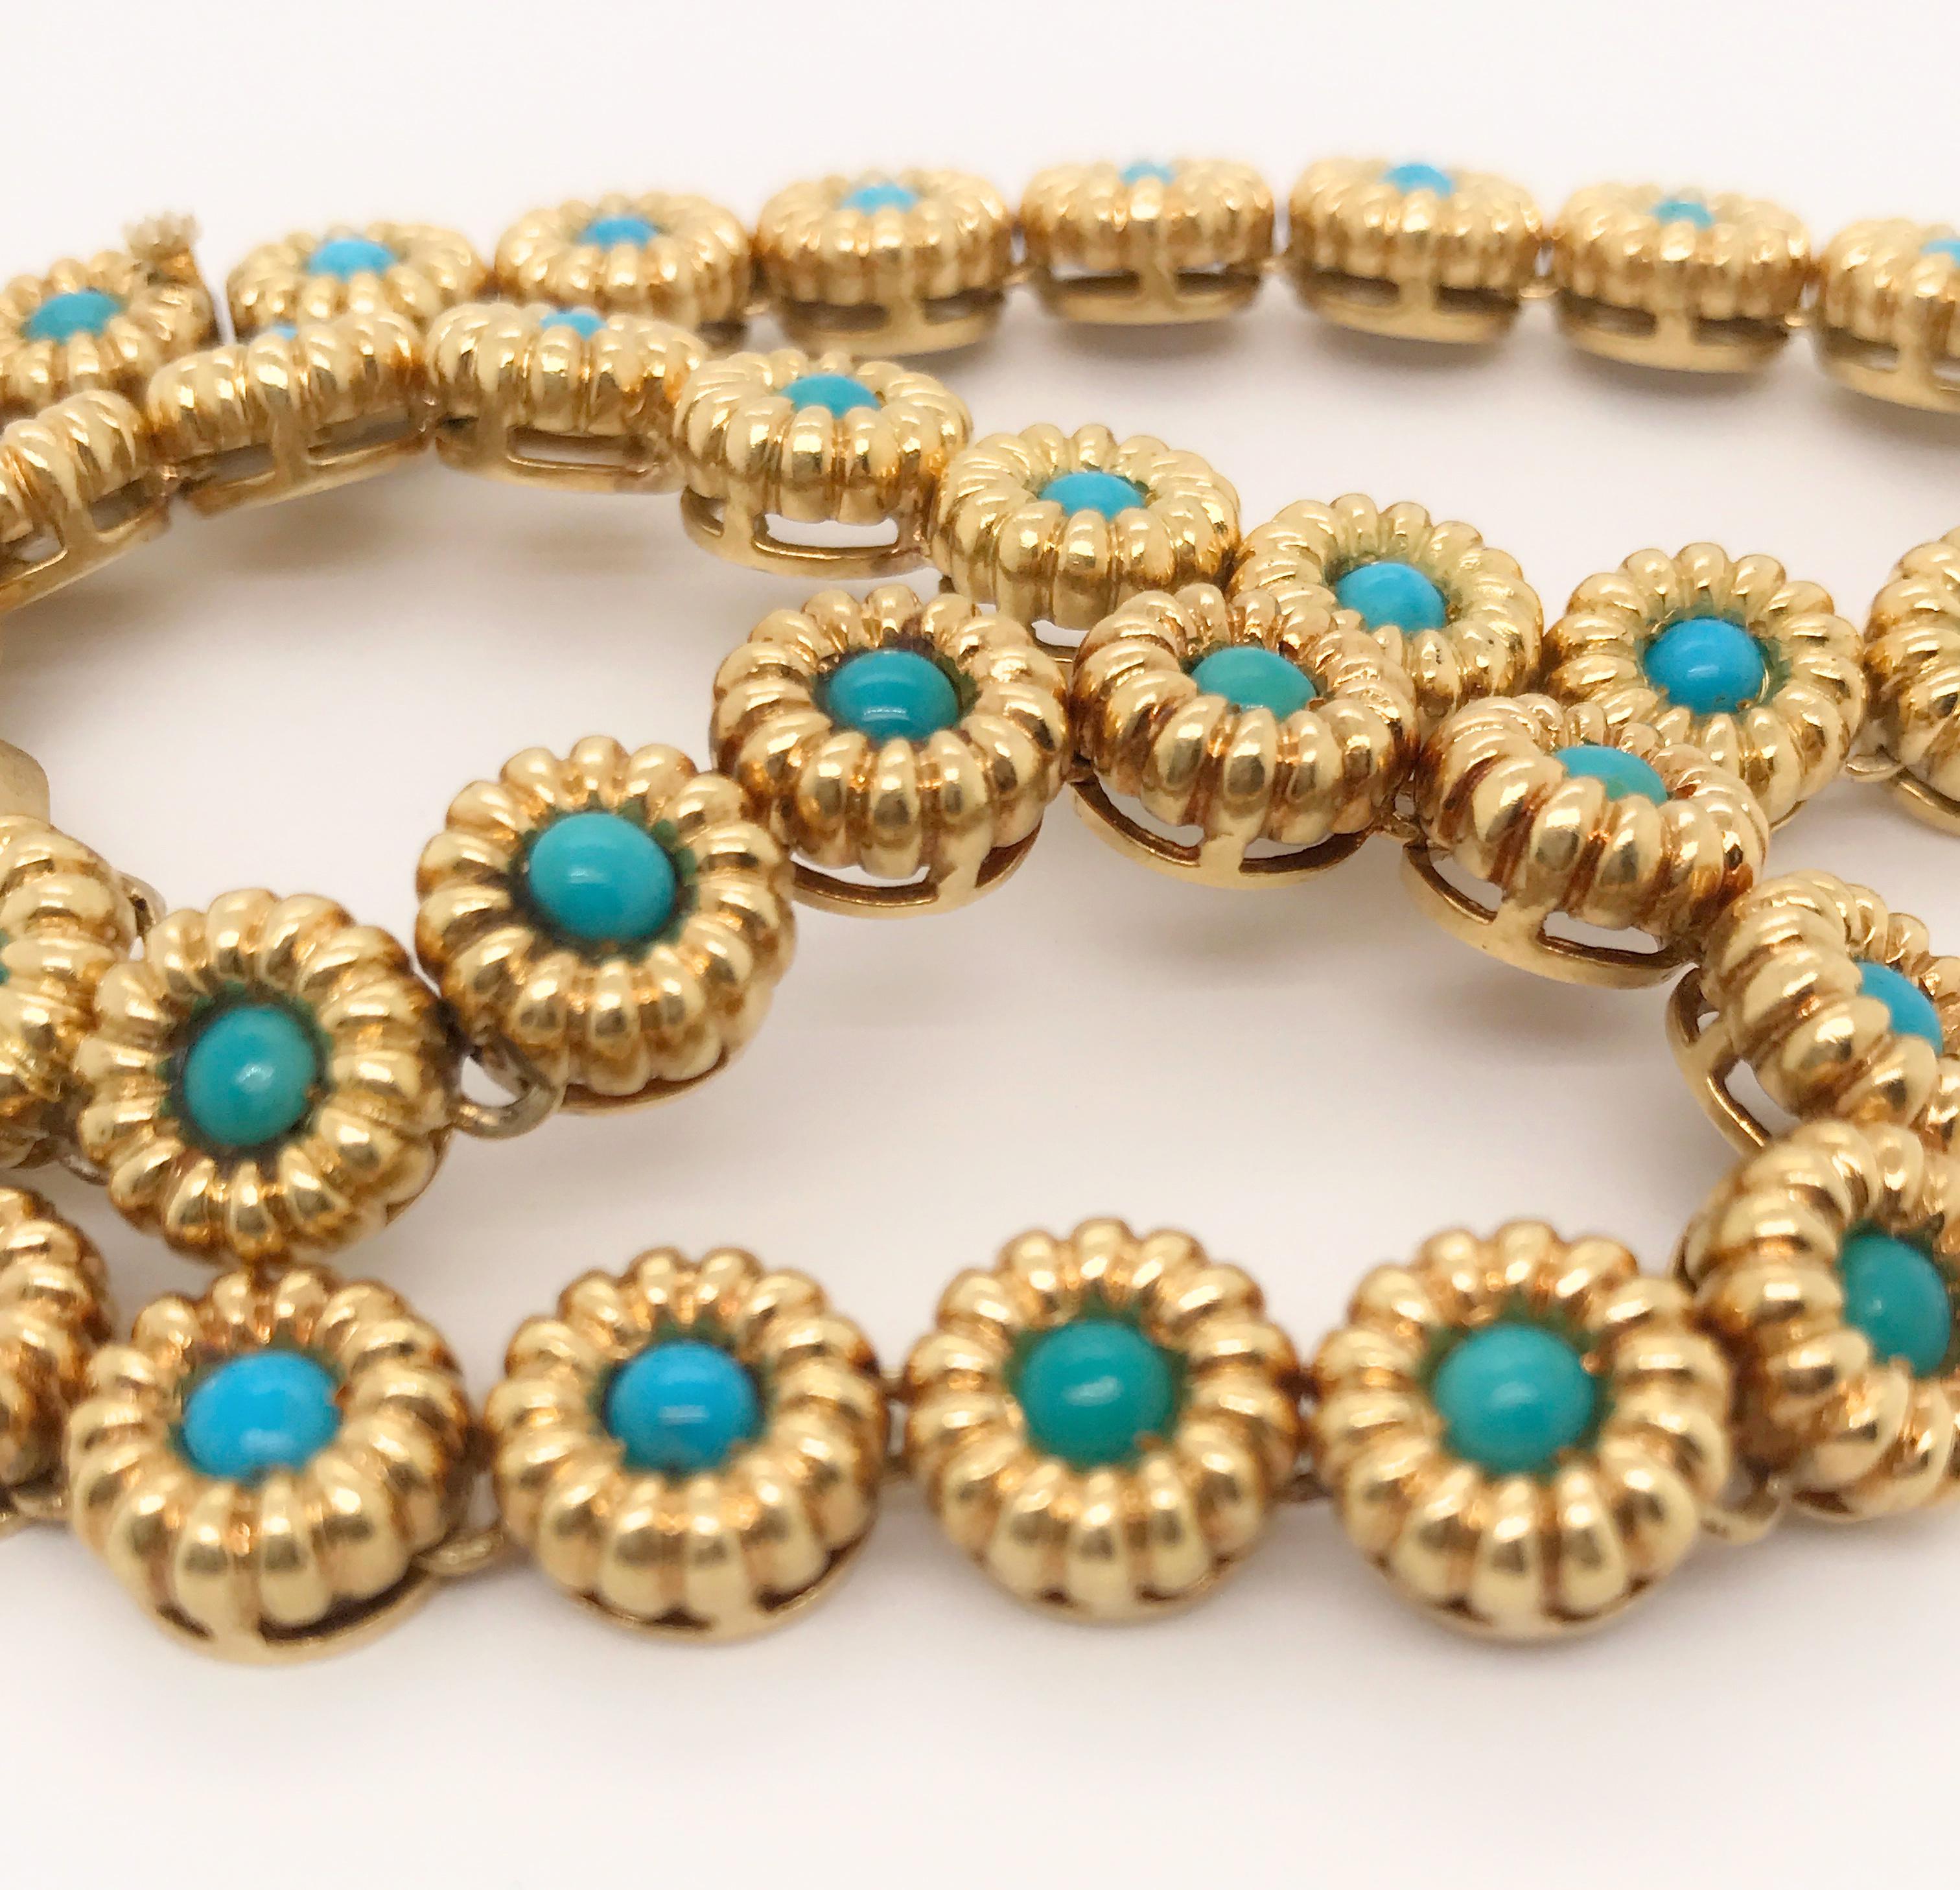 18 Karat Yellow Gold Turquoise Bracelets or Choker Necklace For Sale 10